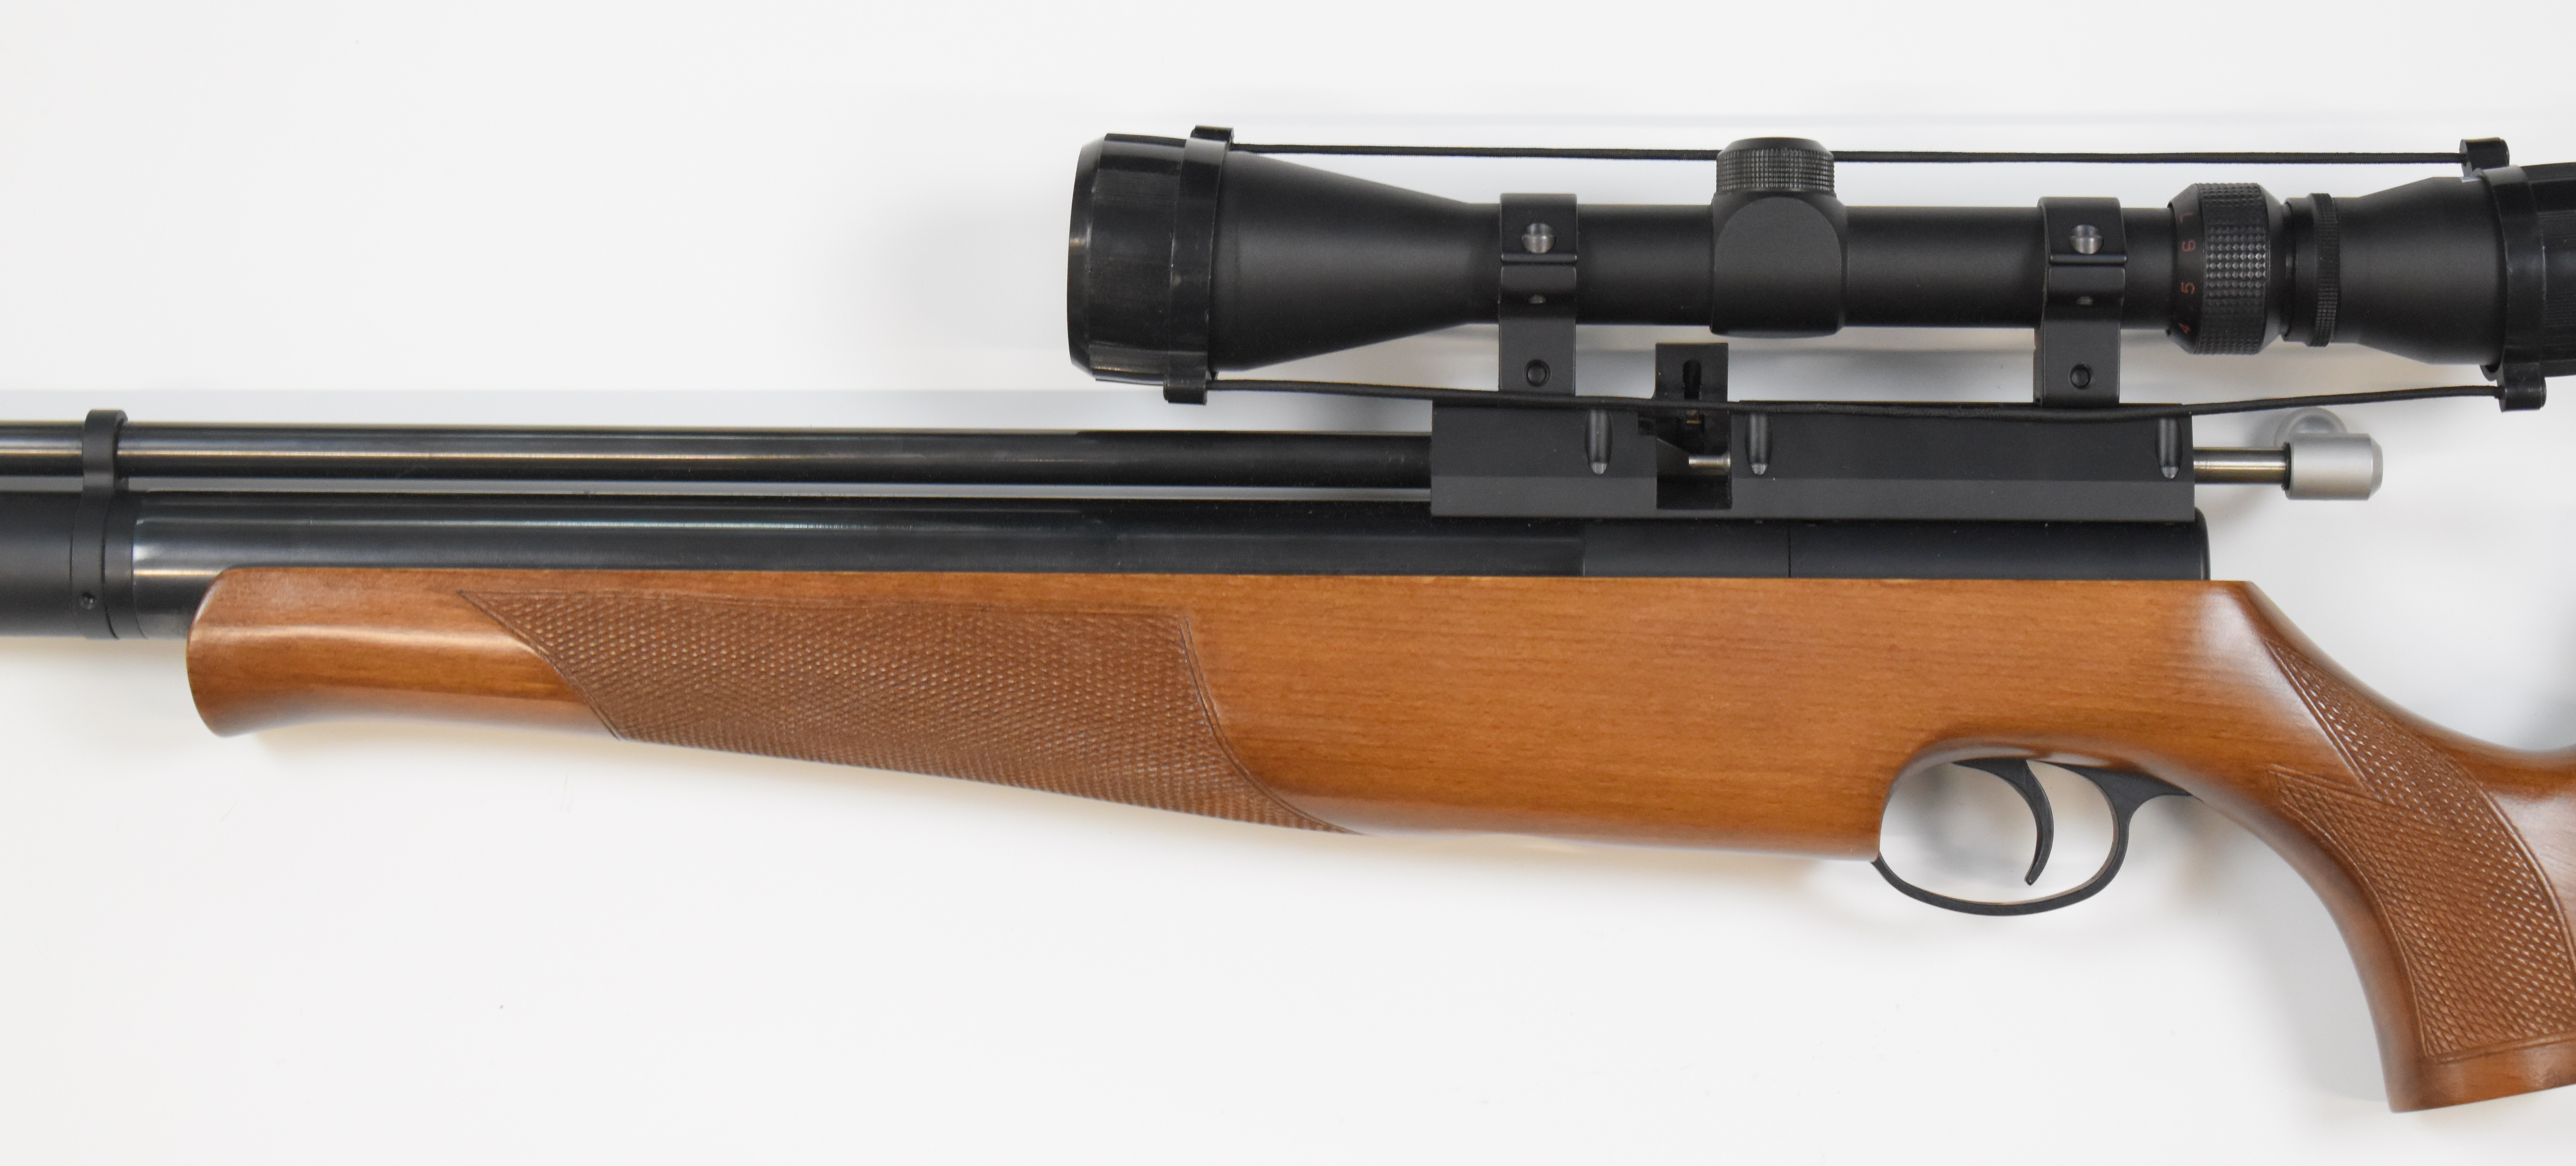 Air Arms S410 .22 PCP air rifle with chequered semi-pistol grip and forend, raised cheek piece, 10- - Image 9 of 11